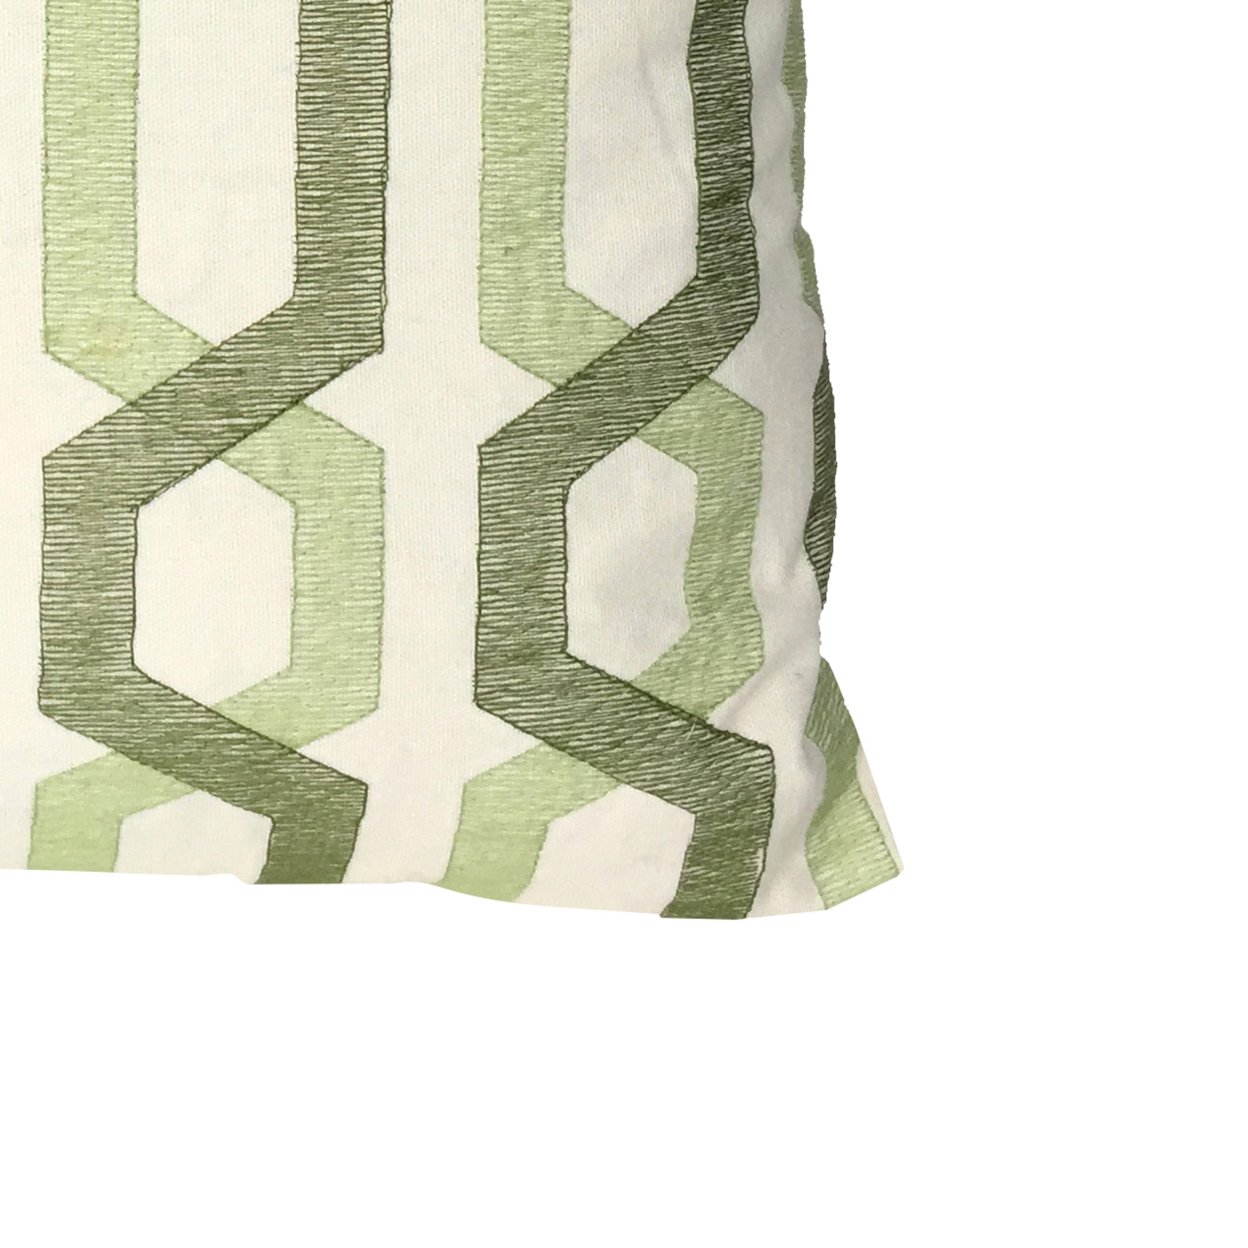 Contemporary Cotton Pillow With Geometric Embroidery, White And Green- Saltoro Sherpi